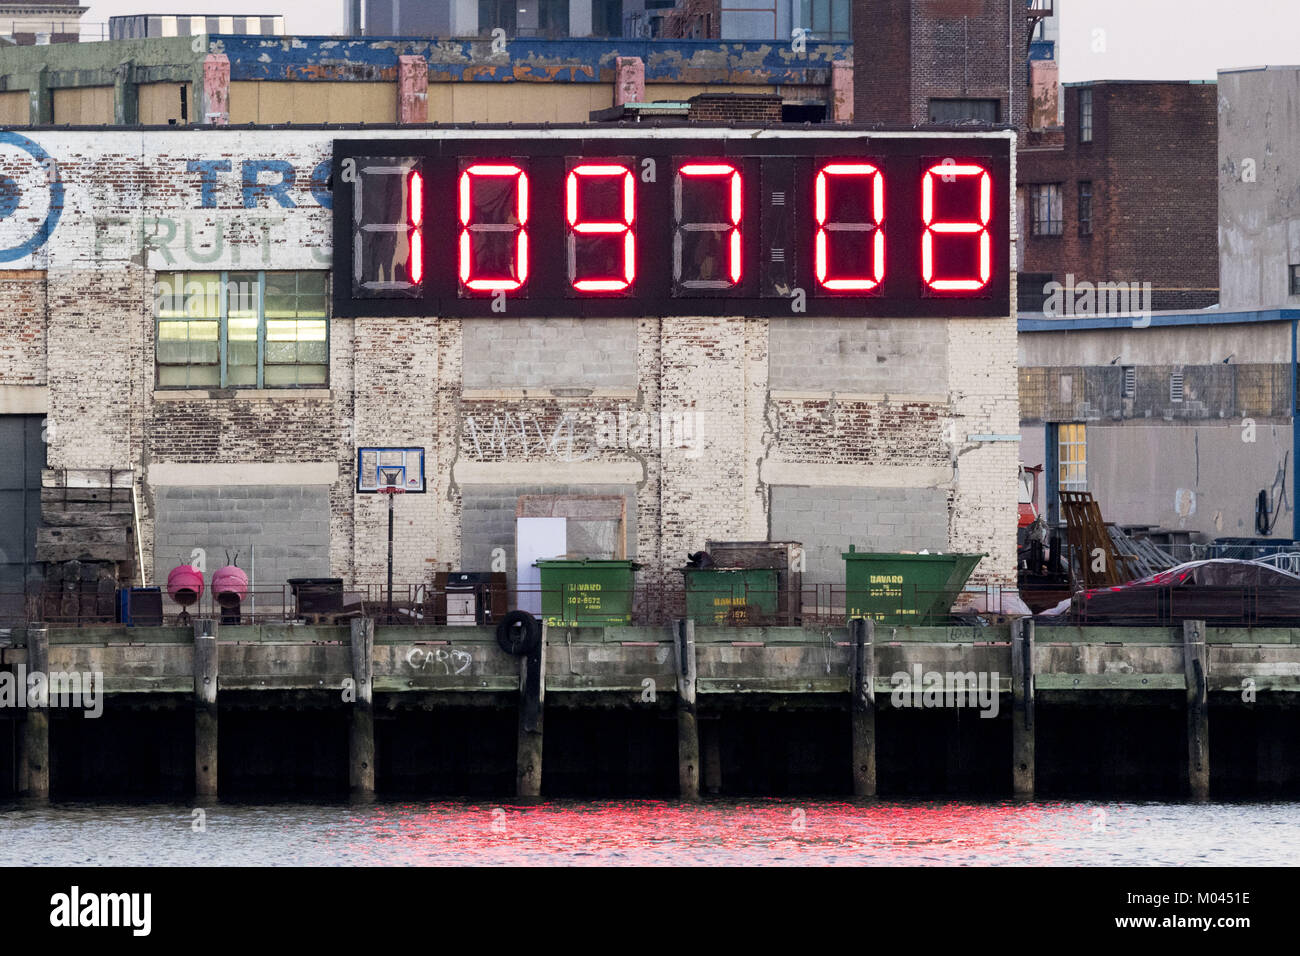 Queens, NY, USA. 18th Jan, 2018. Very large countdown clock showing the number of days and hours left until the next US presidential inauguration day on January 20, 2021. The clock is located in the Long Island City section of Queens in New York City facing the East River and Manhattan and is easily visible from a large part of the east side of Manhattan. The clock is also known as the ''Trump Countdown Clock''. Photo taken on January 18, 2018 at about 4:50pm which is, as shown in the photo, 1,097 days and 8 hours until the next US presidential inauguration day. (Credit Image: © Michael Br Stock Photo